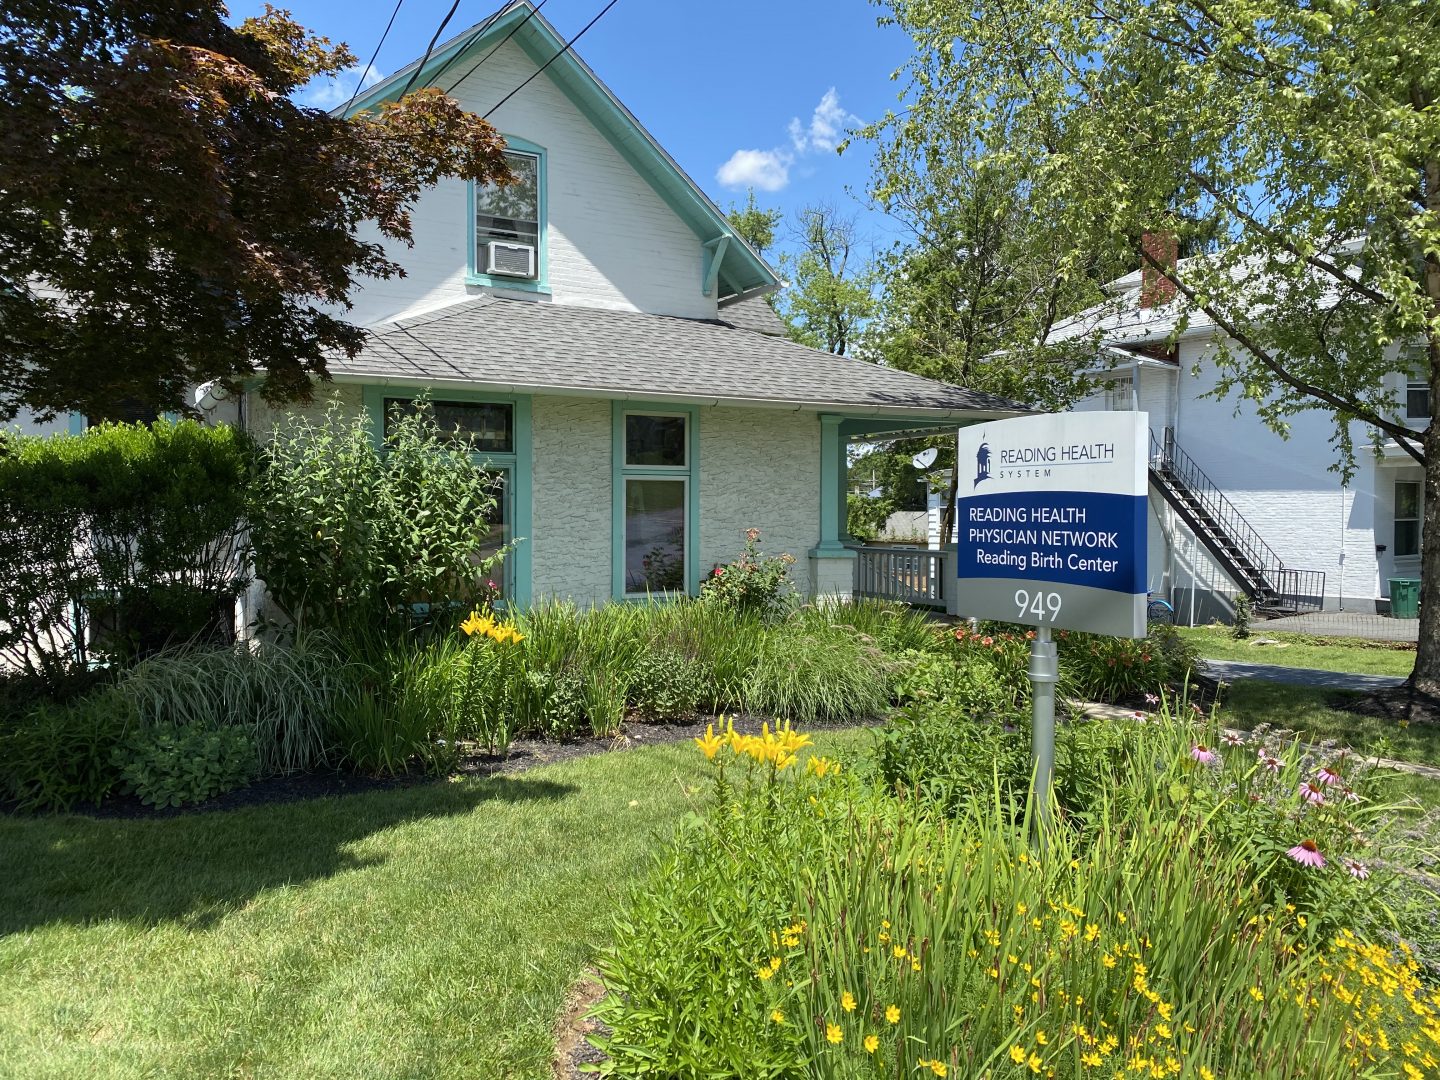 The Reading Birth Center is located in Kenhorst Borough, just outside of Reading city limits. The center was one of several medical services that may be lost in a cost savings move from its owner, Tower Health